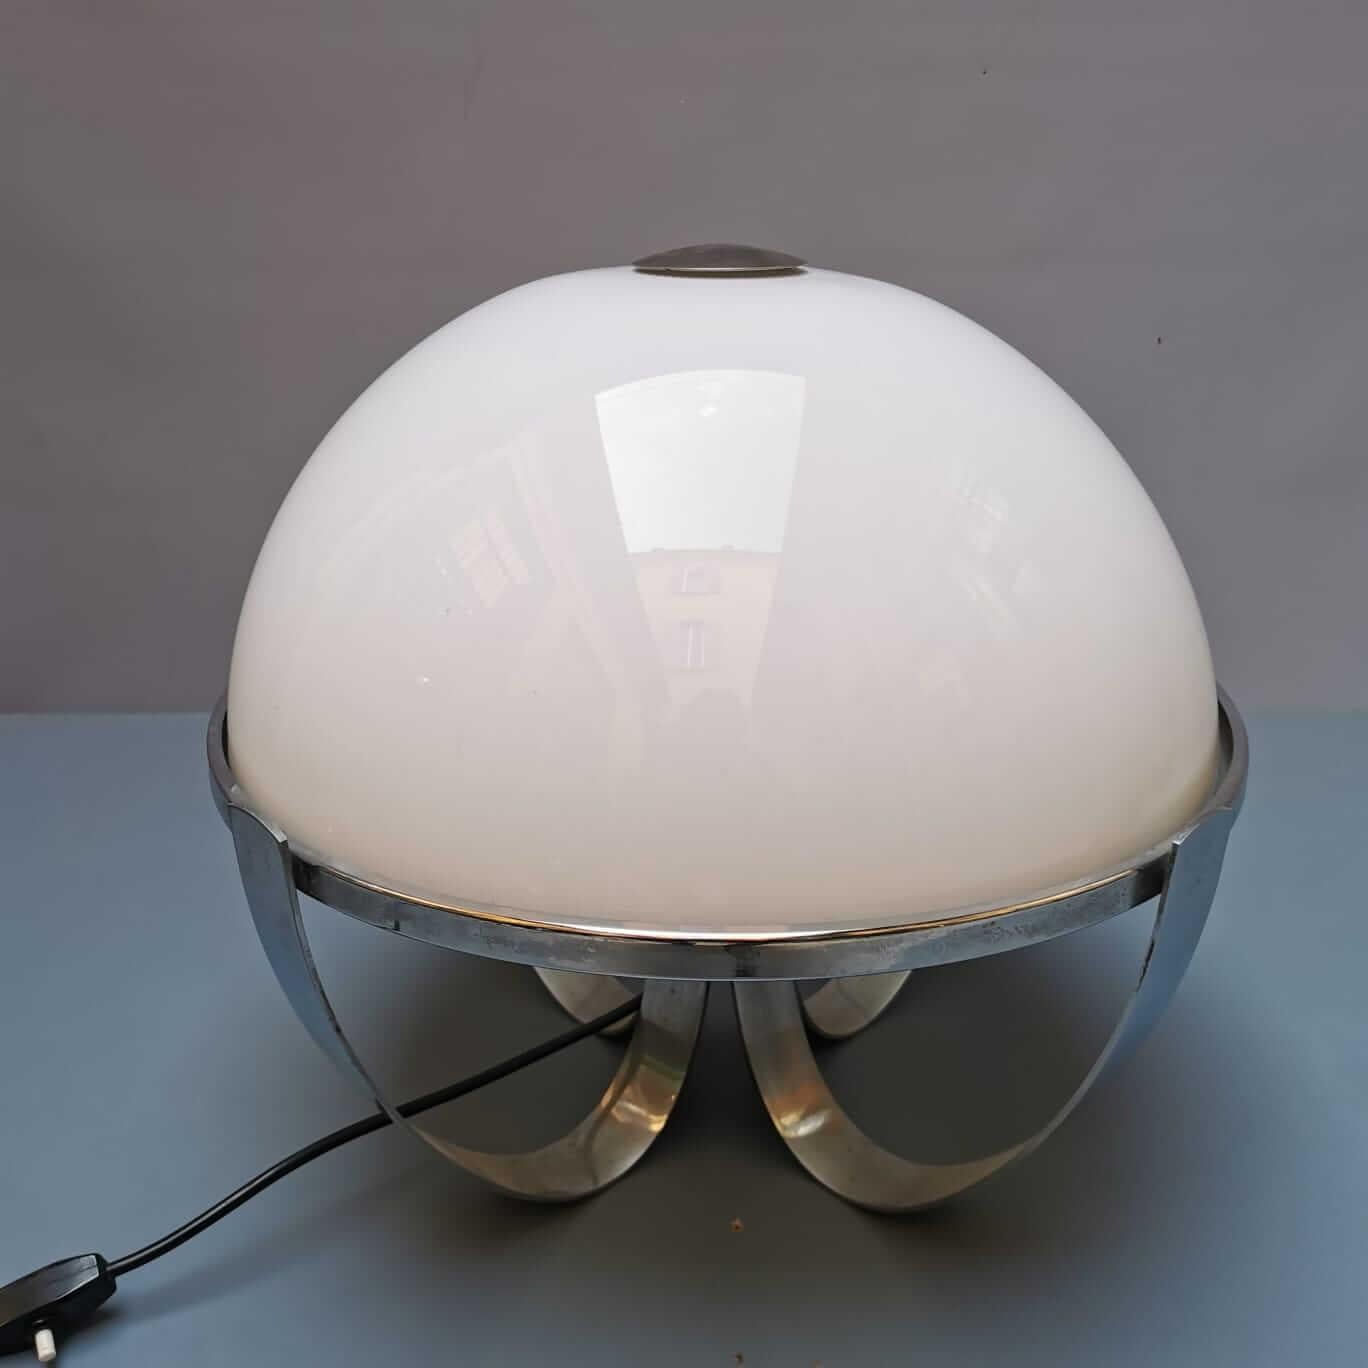 A space age lamp in metal and plastic with a clear 1970s design, it resembles the form od the octopus and could be a perfect object for a table or a sideboard. The lamp is in general good conditions but could present some minor sign of time and use.